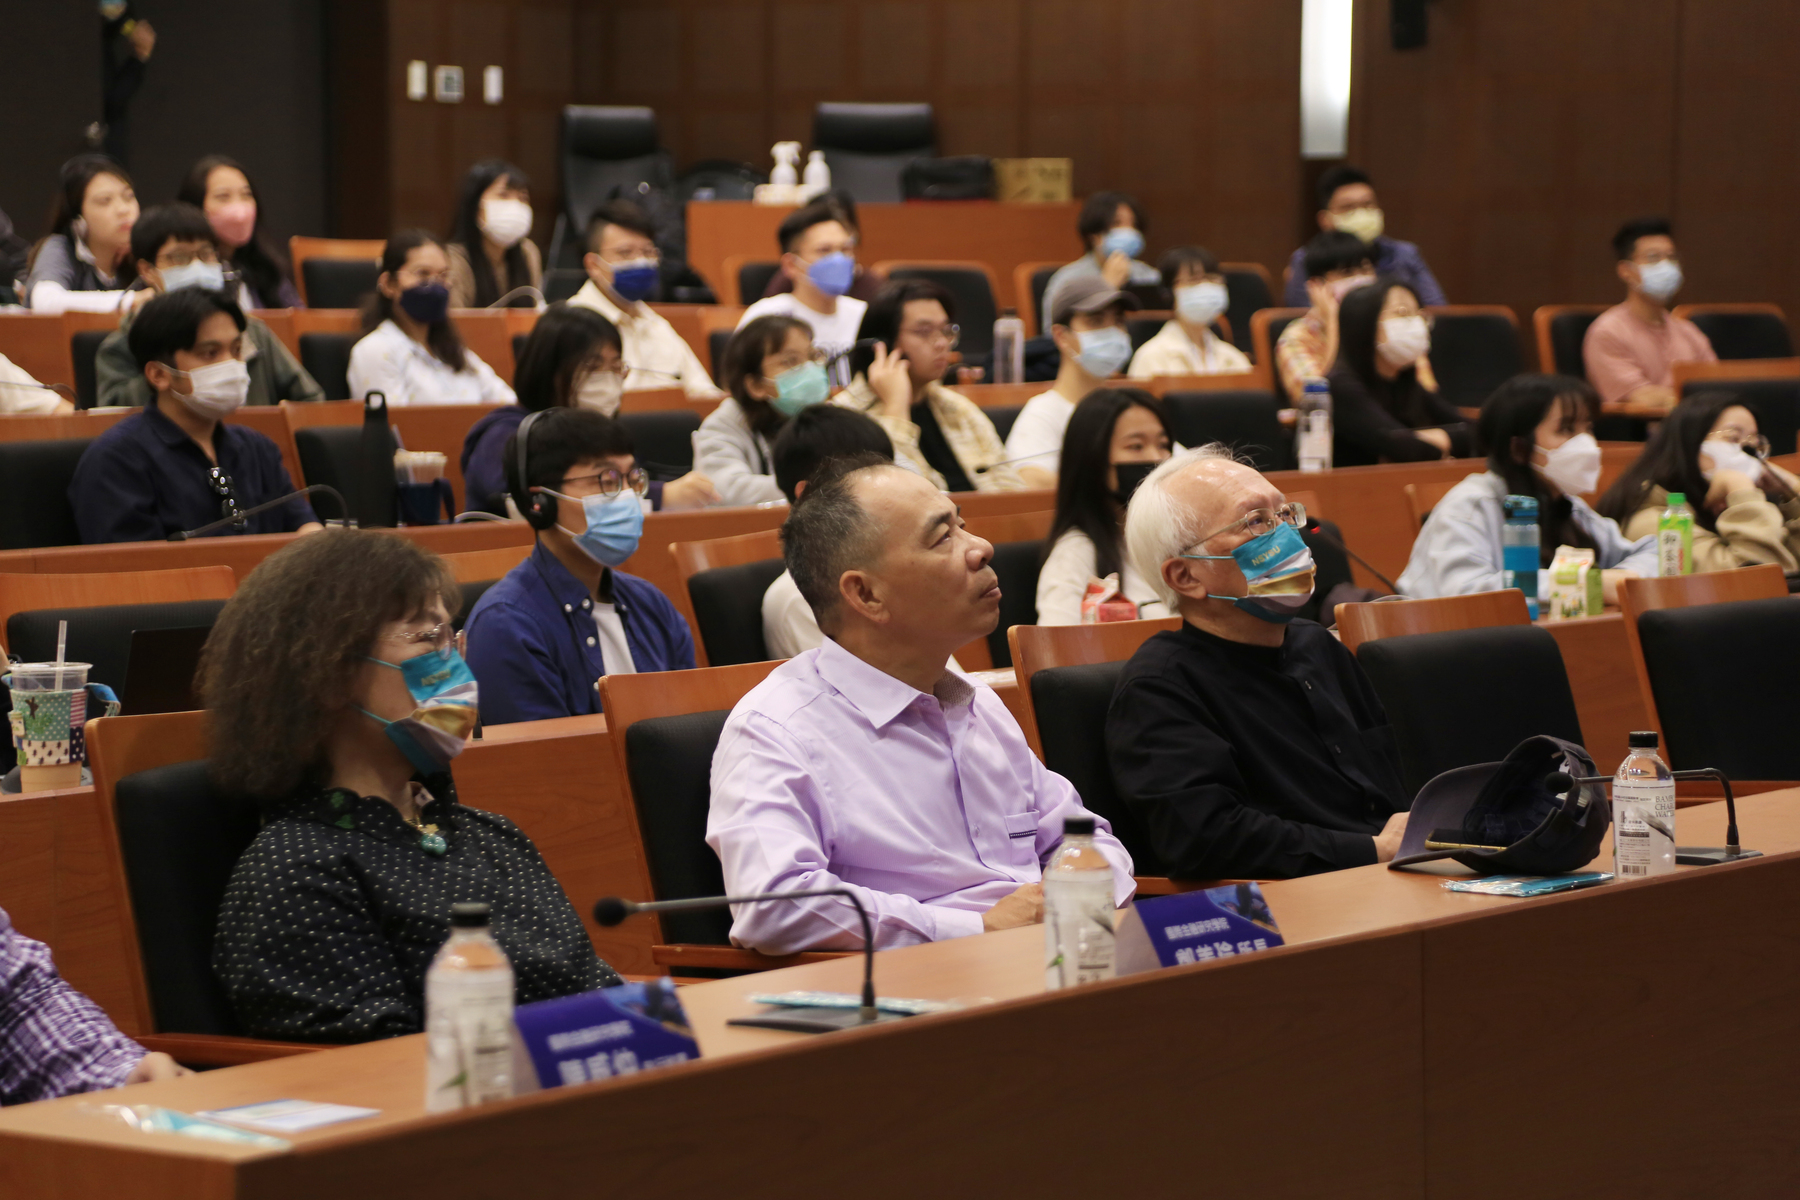 SBF, NSYSU, in collaboration with the Asian Development Bank (ADB), organized the ADB Career Presentation, attracting more than one hundred attendees.